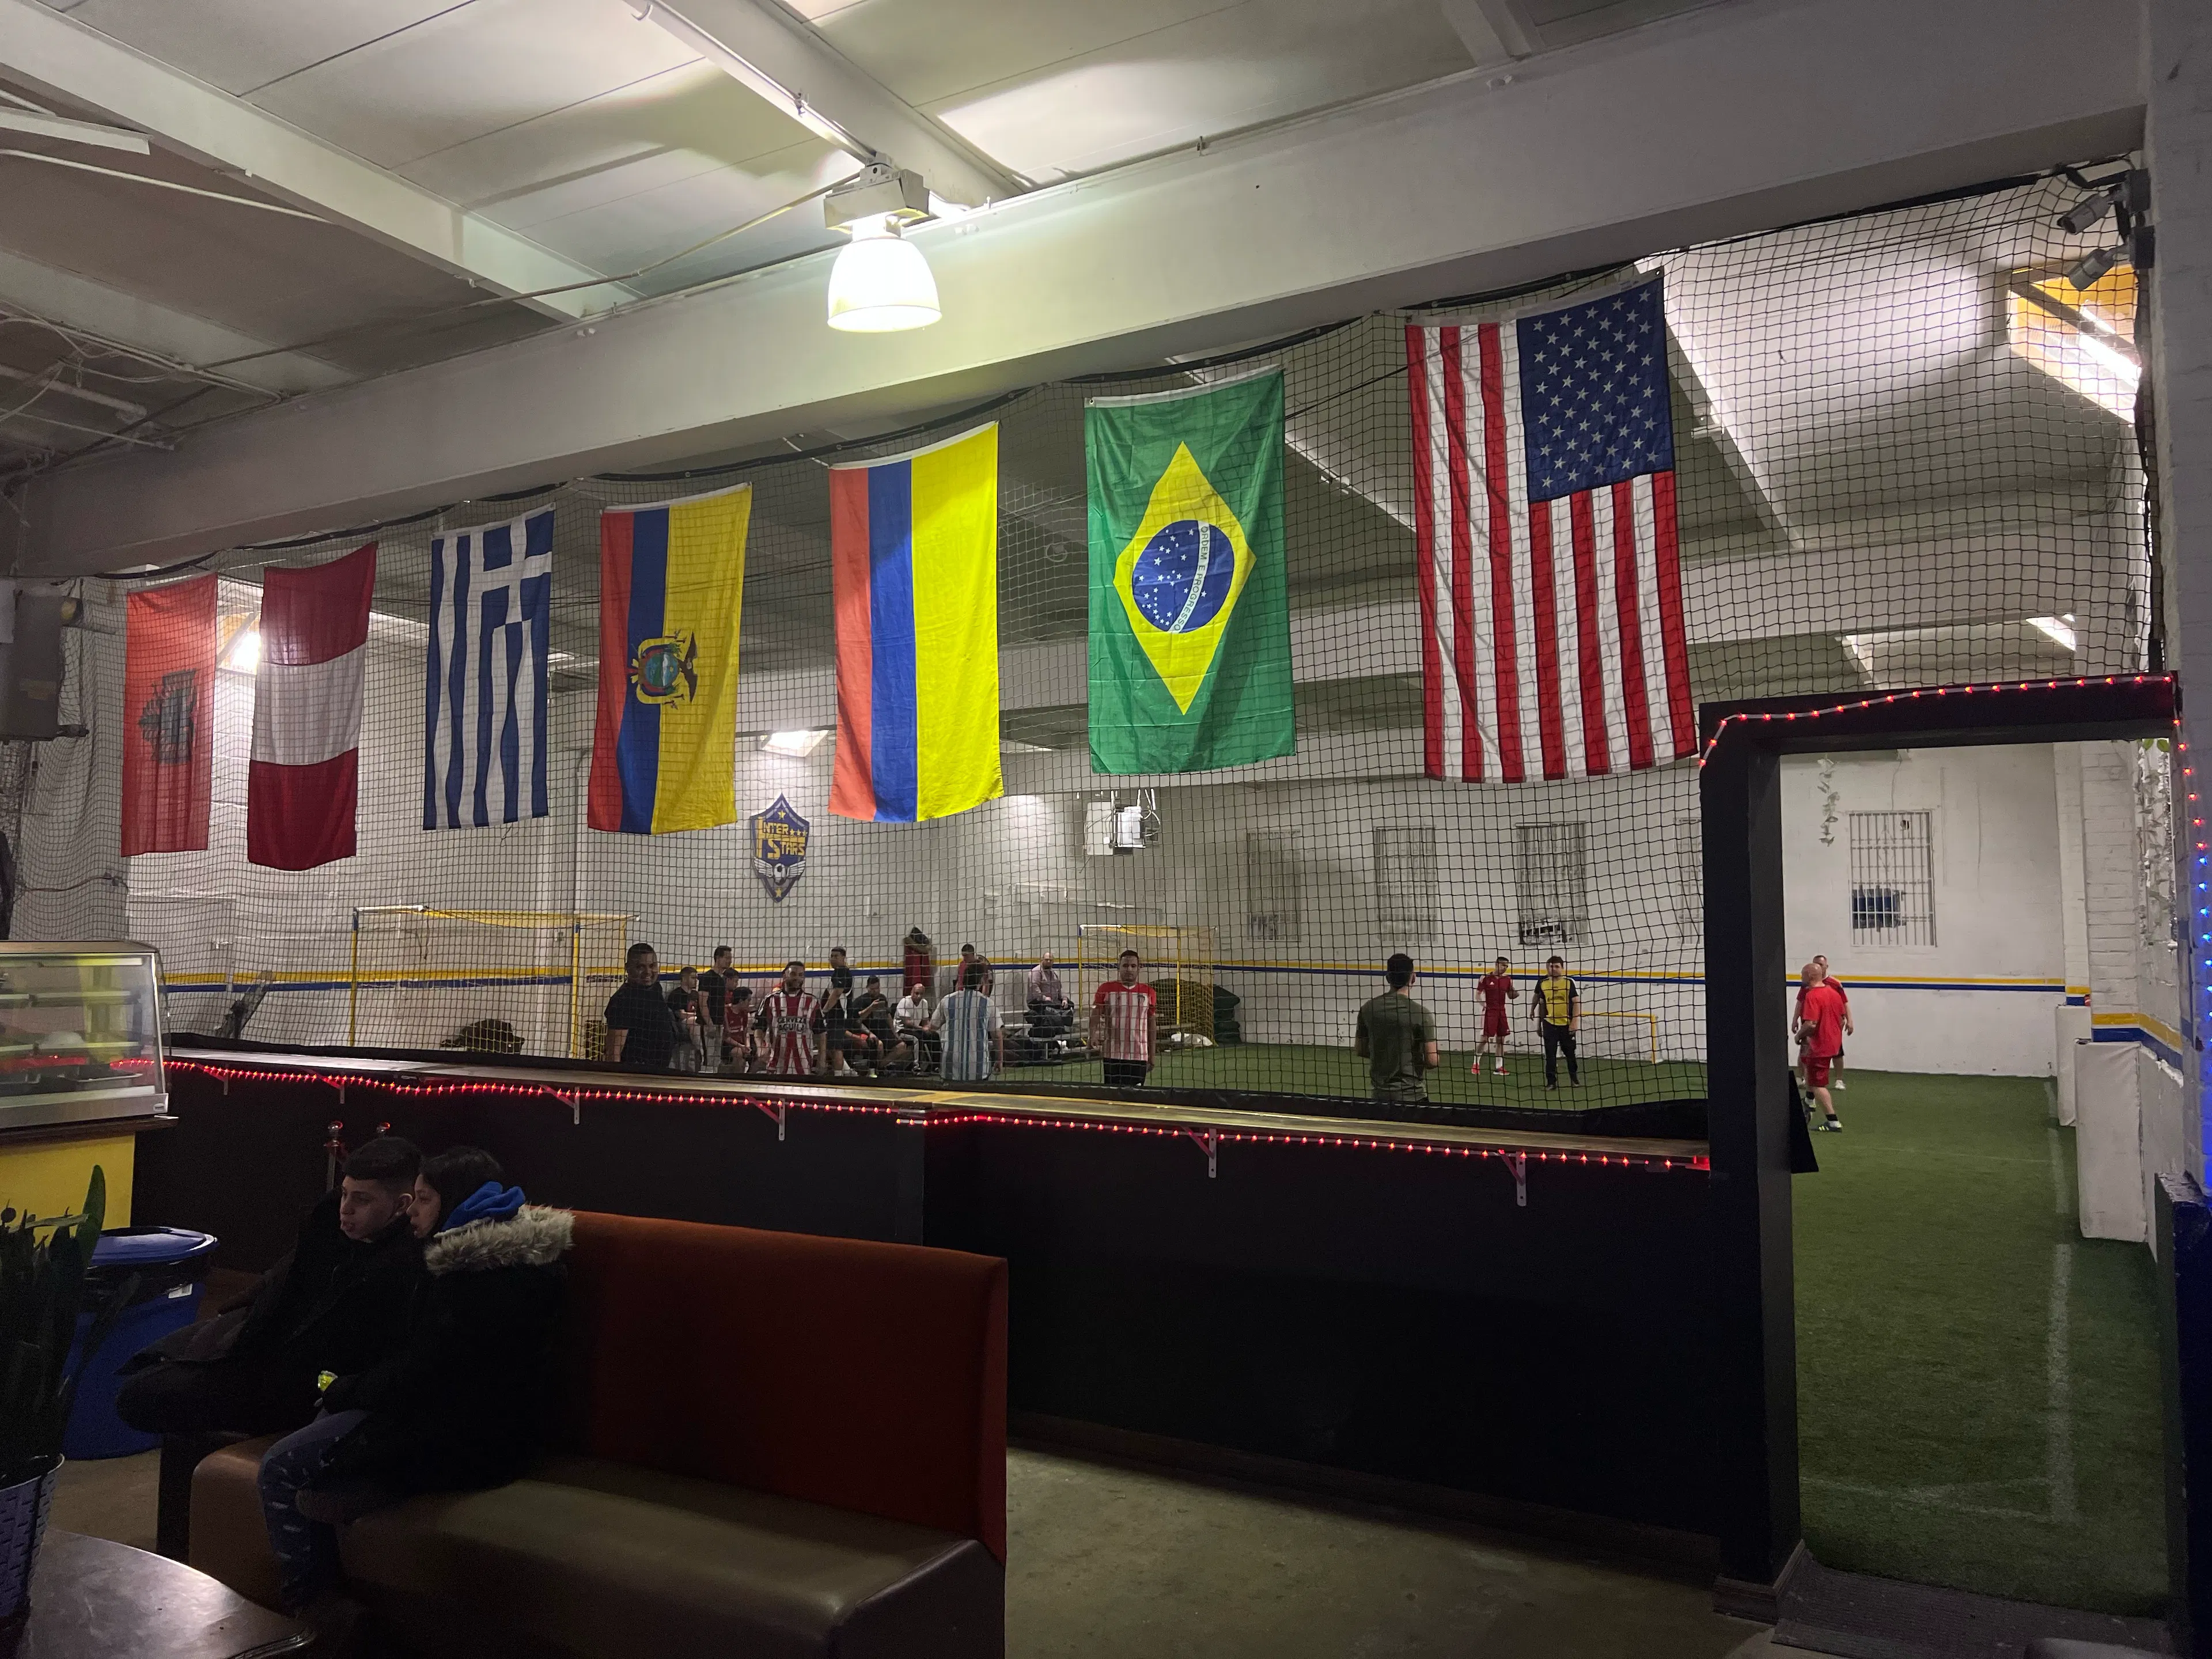 Franko's Garage: Best Place for Footvolley in NYC